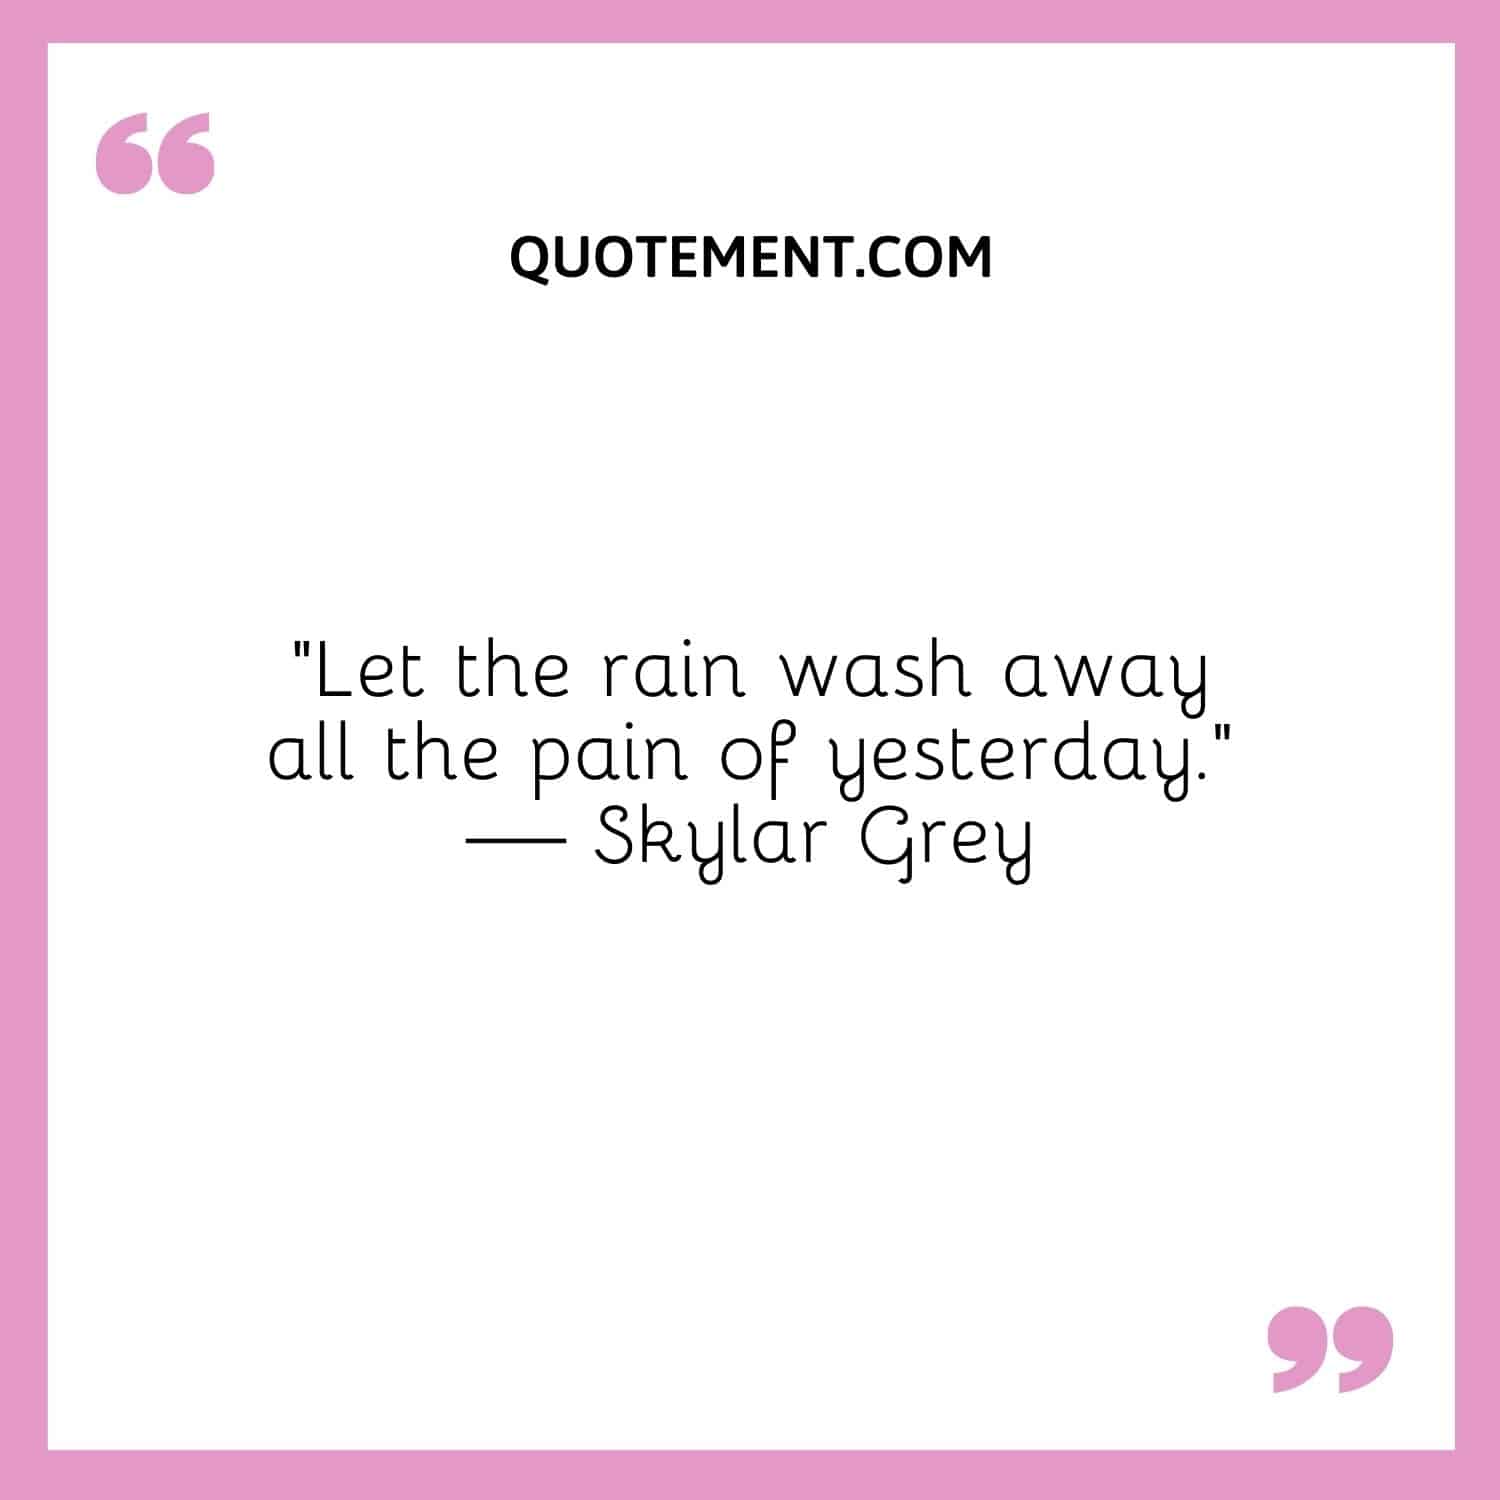 “Let the rain wash away all the pain of yesterday.